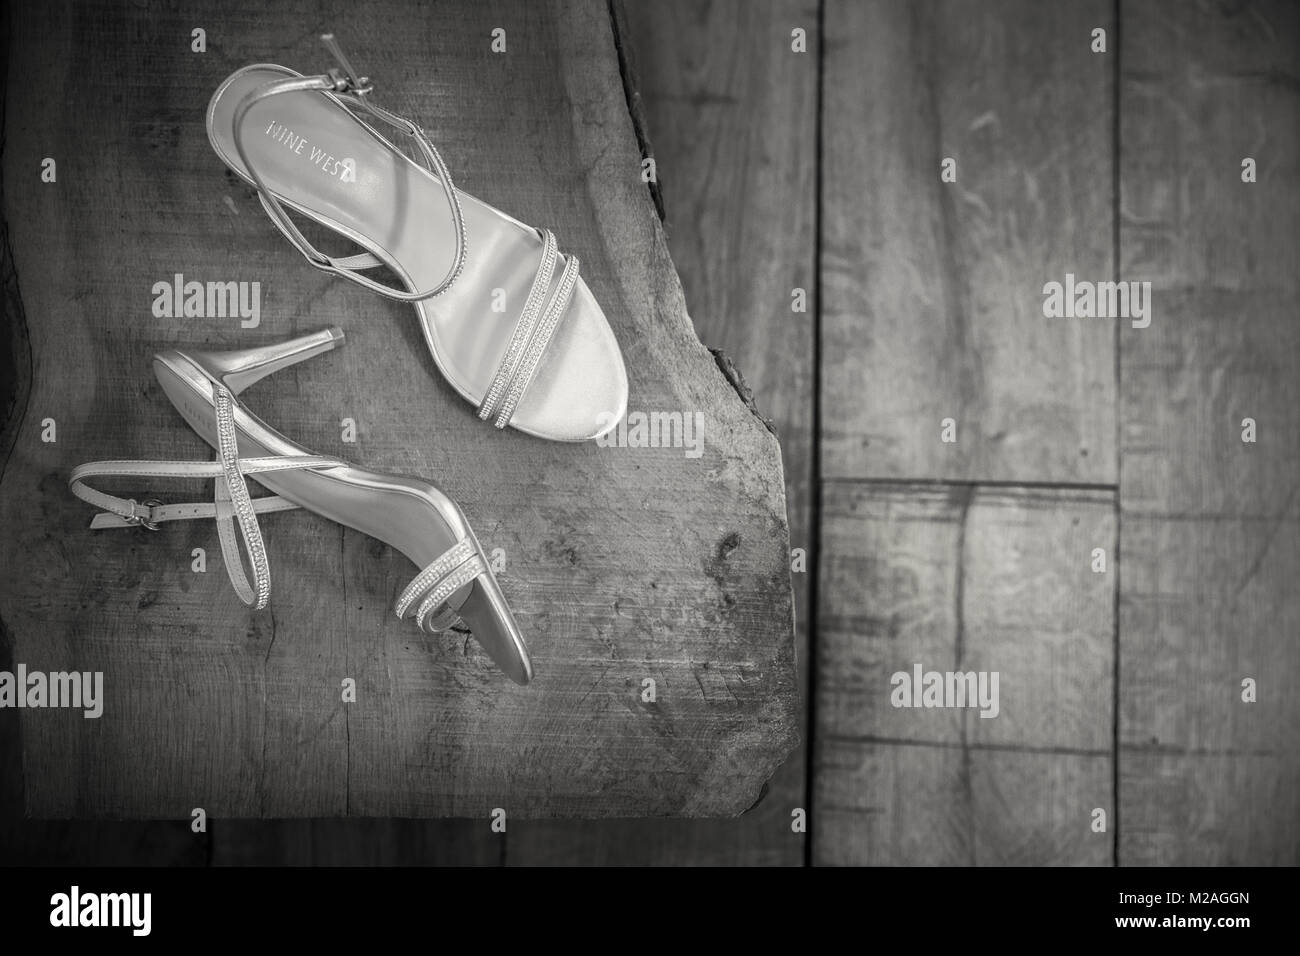 Pair of high heel ladies silver sandals on wooden background, overhead view Stock Photo